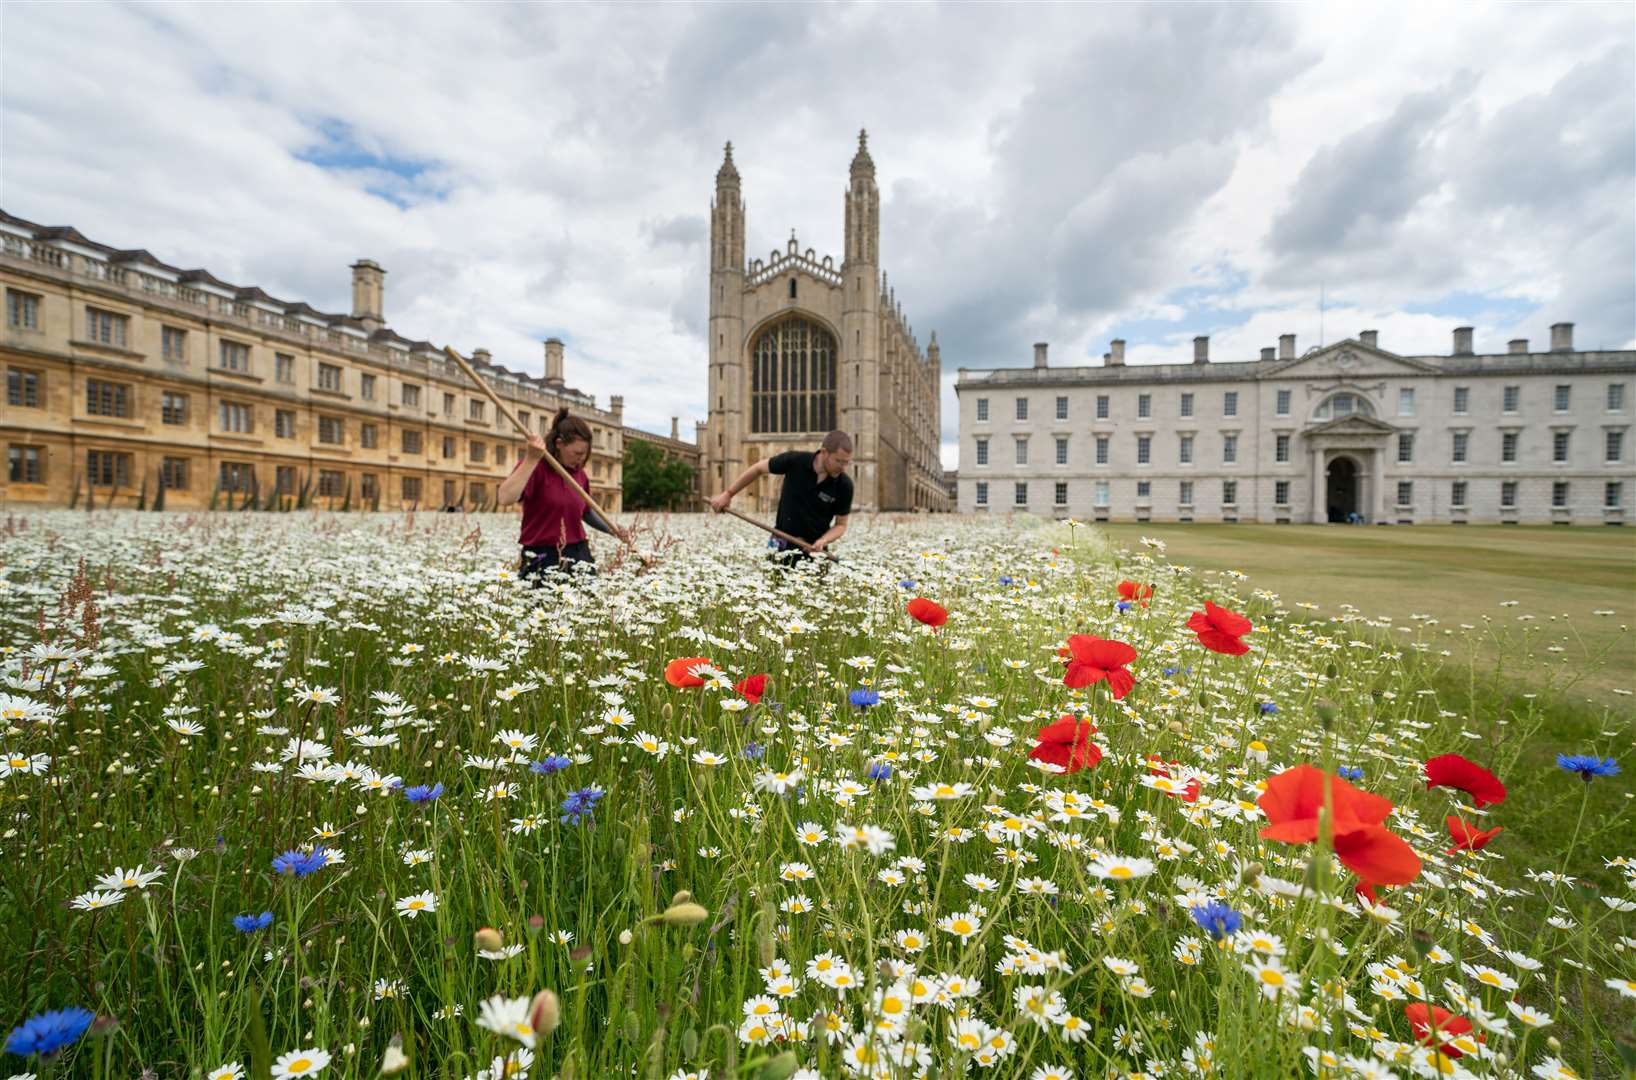 Gardeners David Kay and Lou Singfield tend to the wildflower meadow which has burst into flower at King’s College in Cambridge (Joe Giddens/PA)